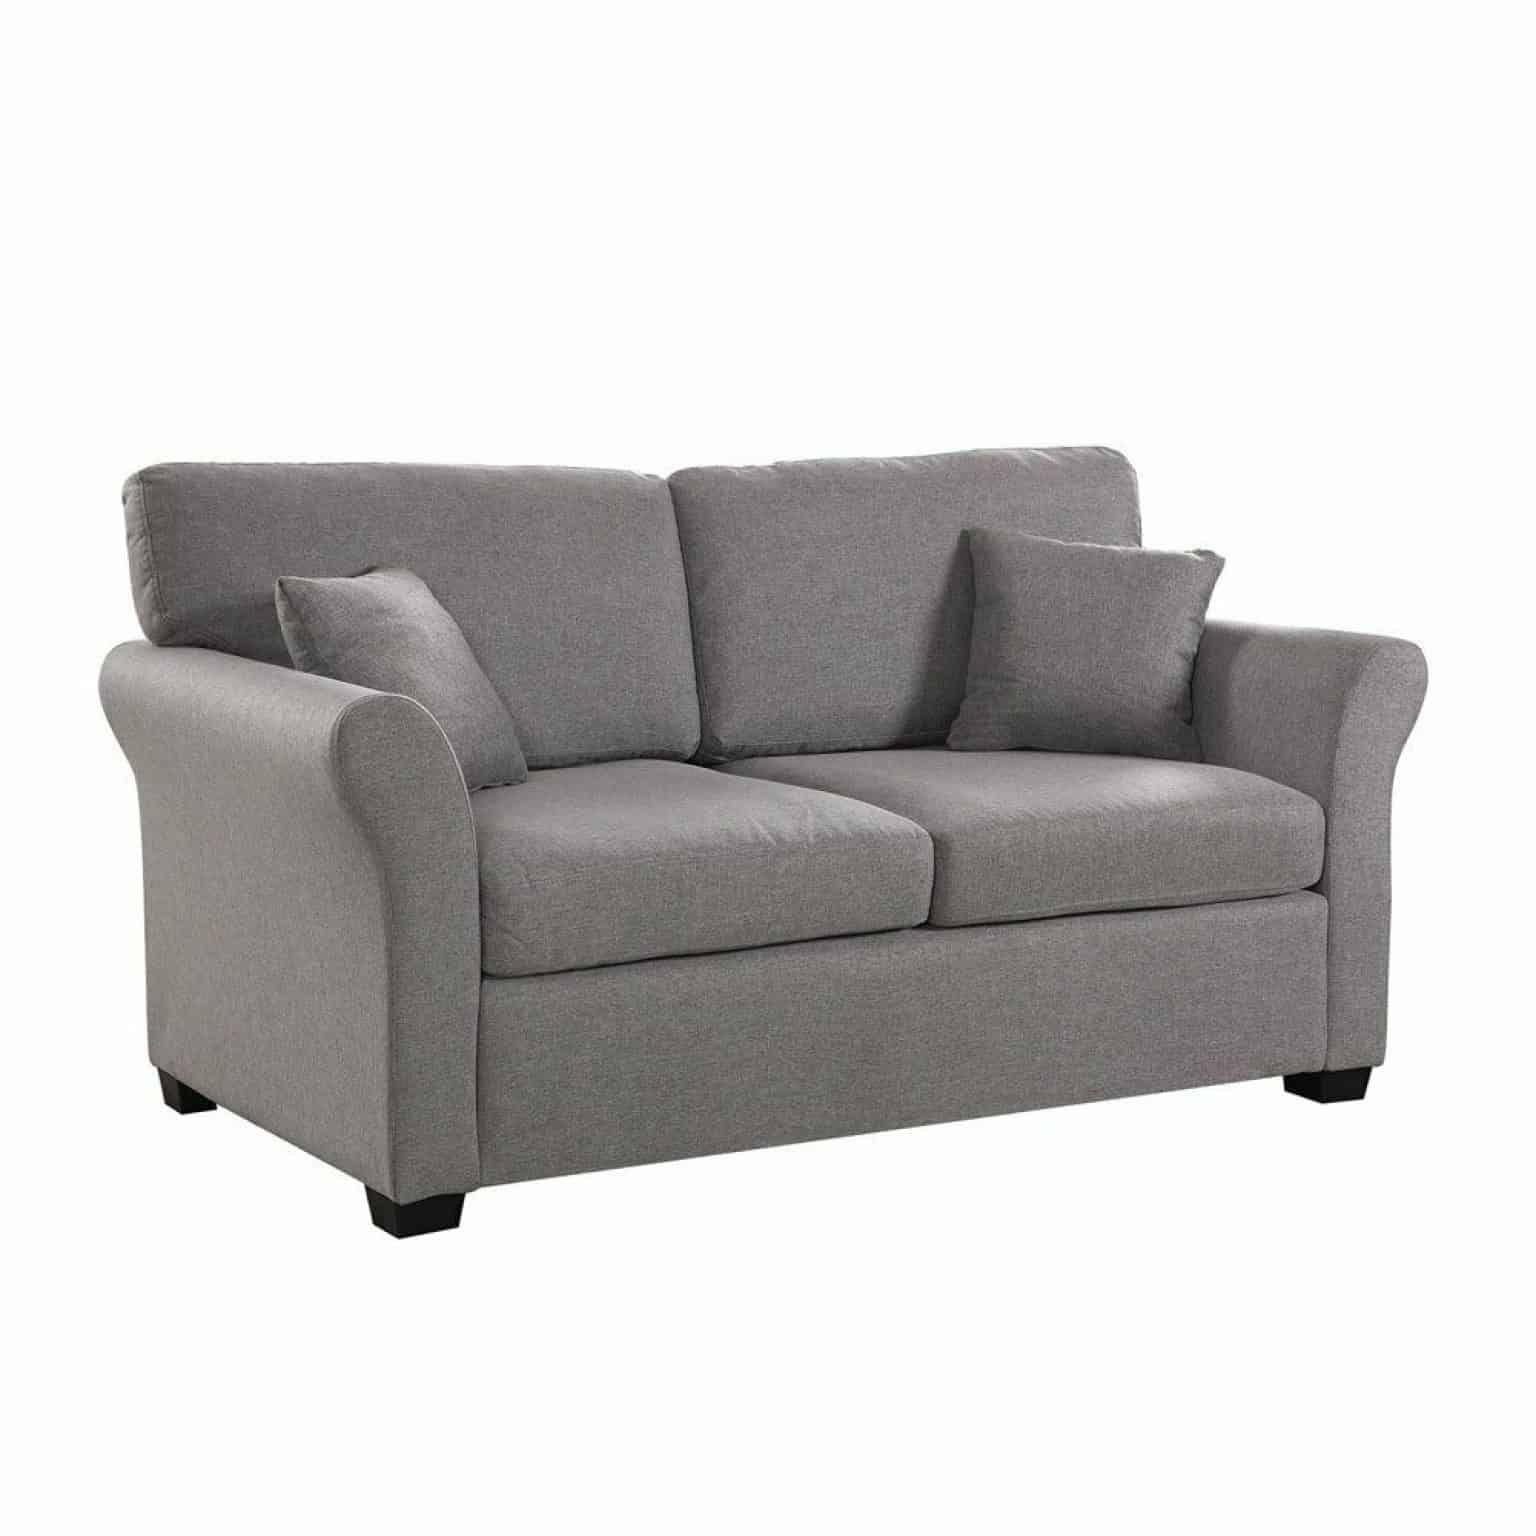 63" Bluish Grey Cozy Loveseat Sofa W/ 2 Accent Pillows – Affordable Pertaining To Sofas In Bluish Grey (Gallery 4 of 20)